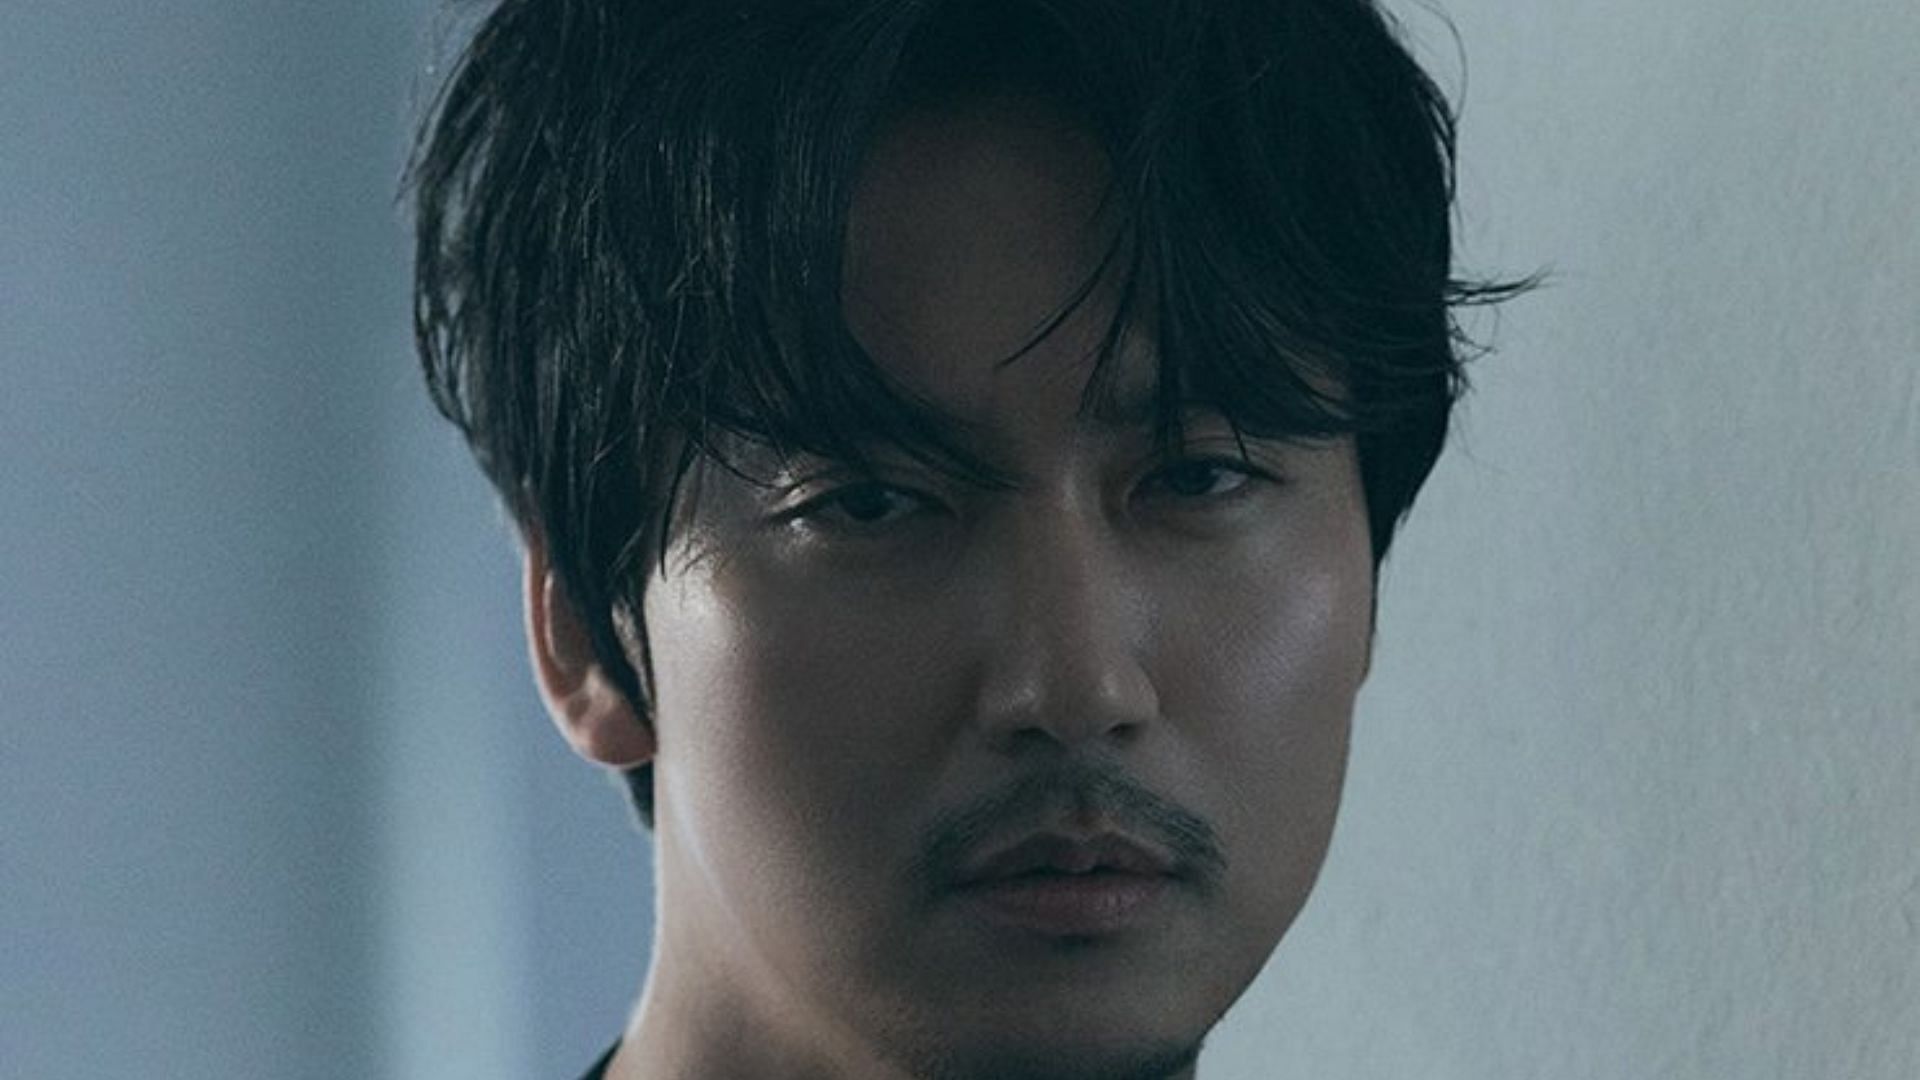 Kim Nam-gil will feature in Song of The Bandits (image via ELLE Korea)